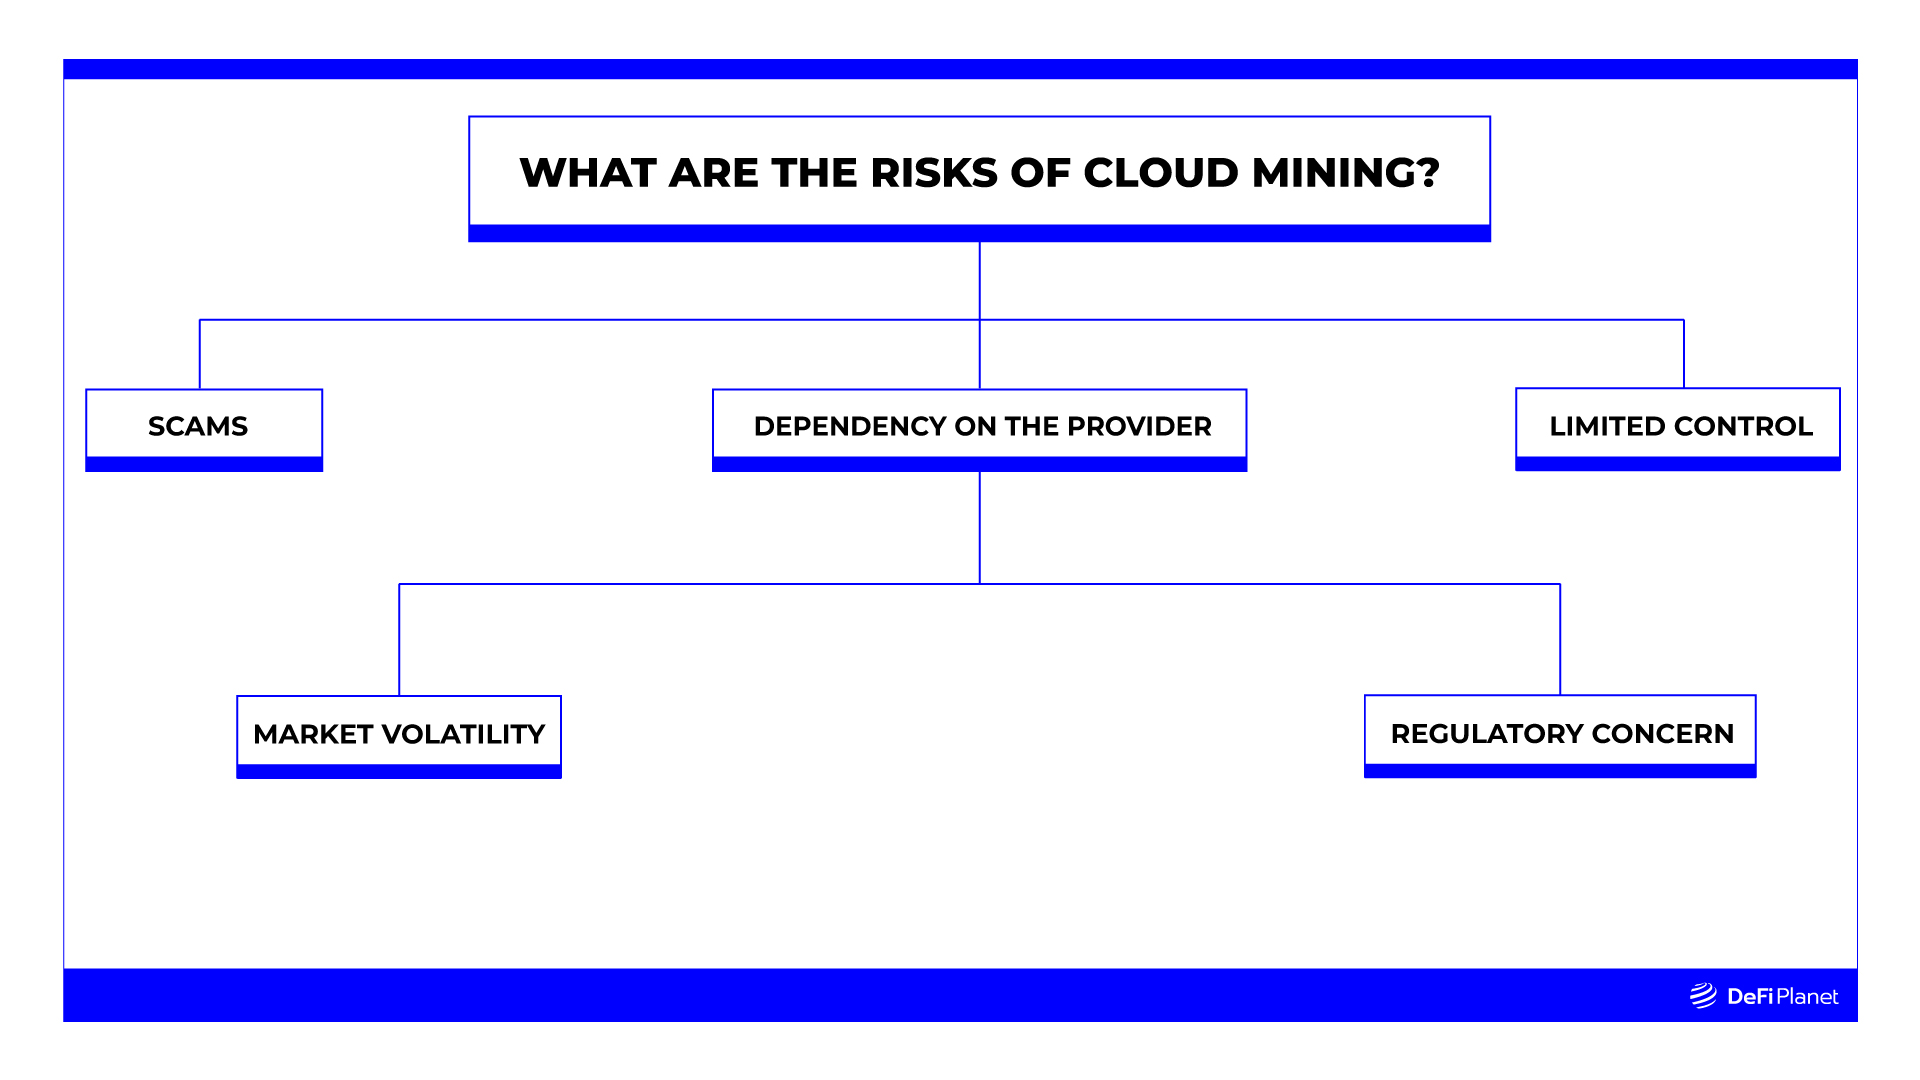 What are the risks of cloud mining?